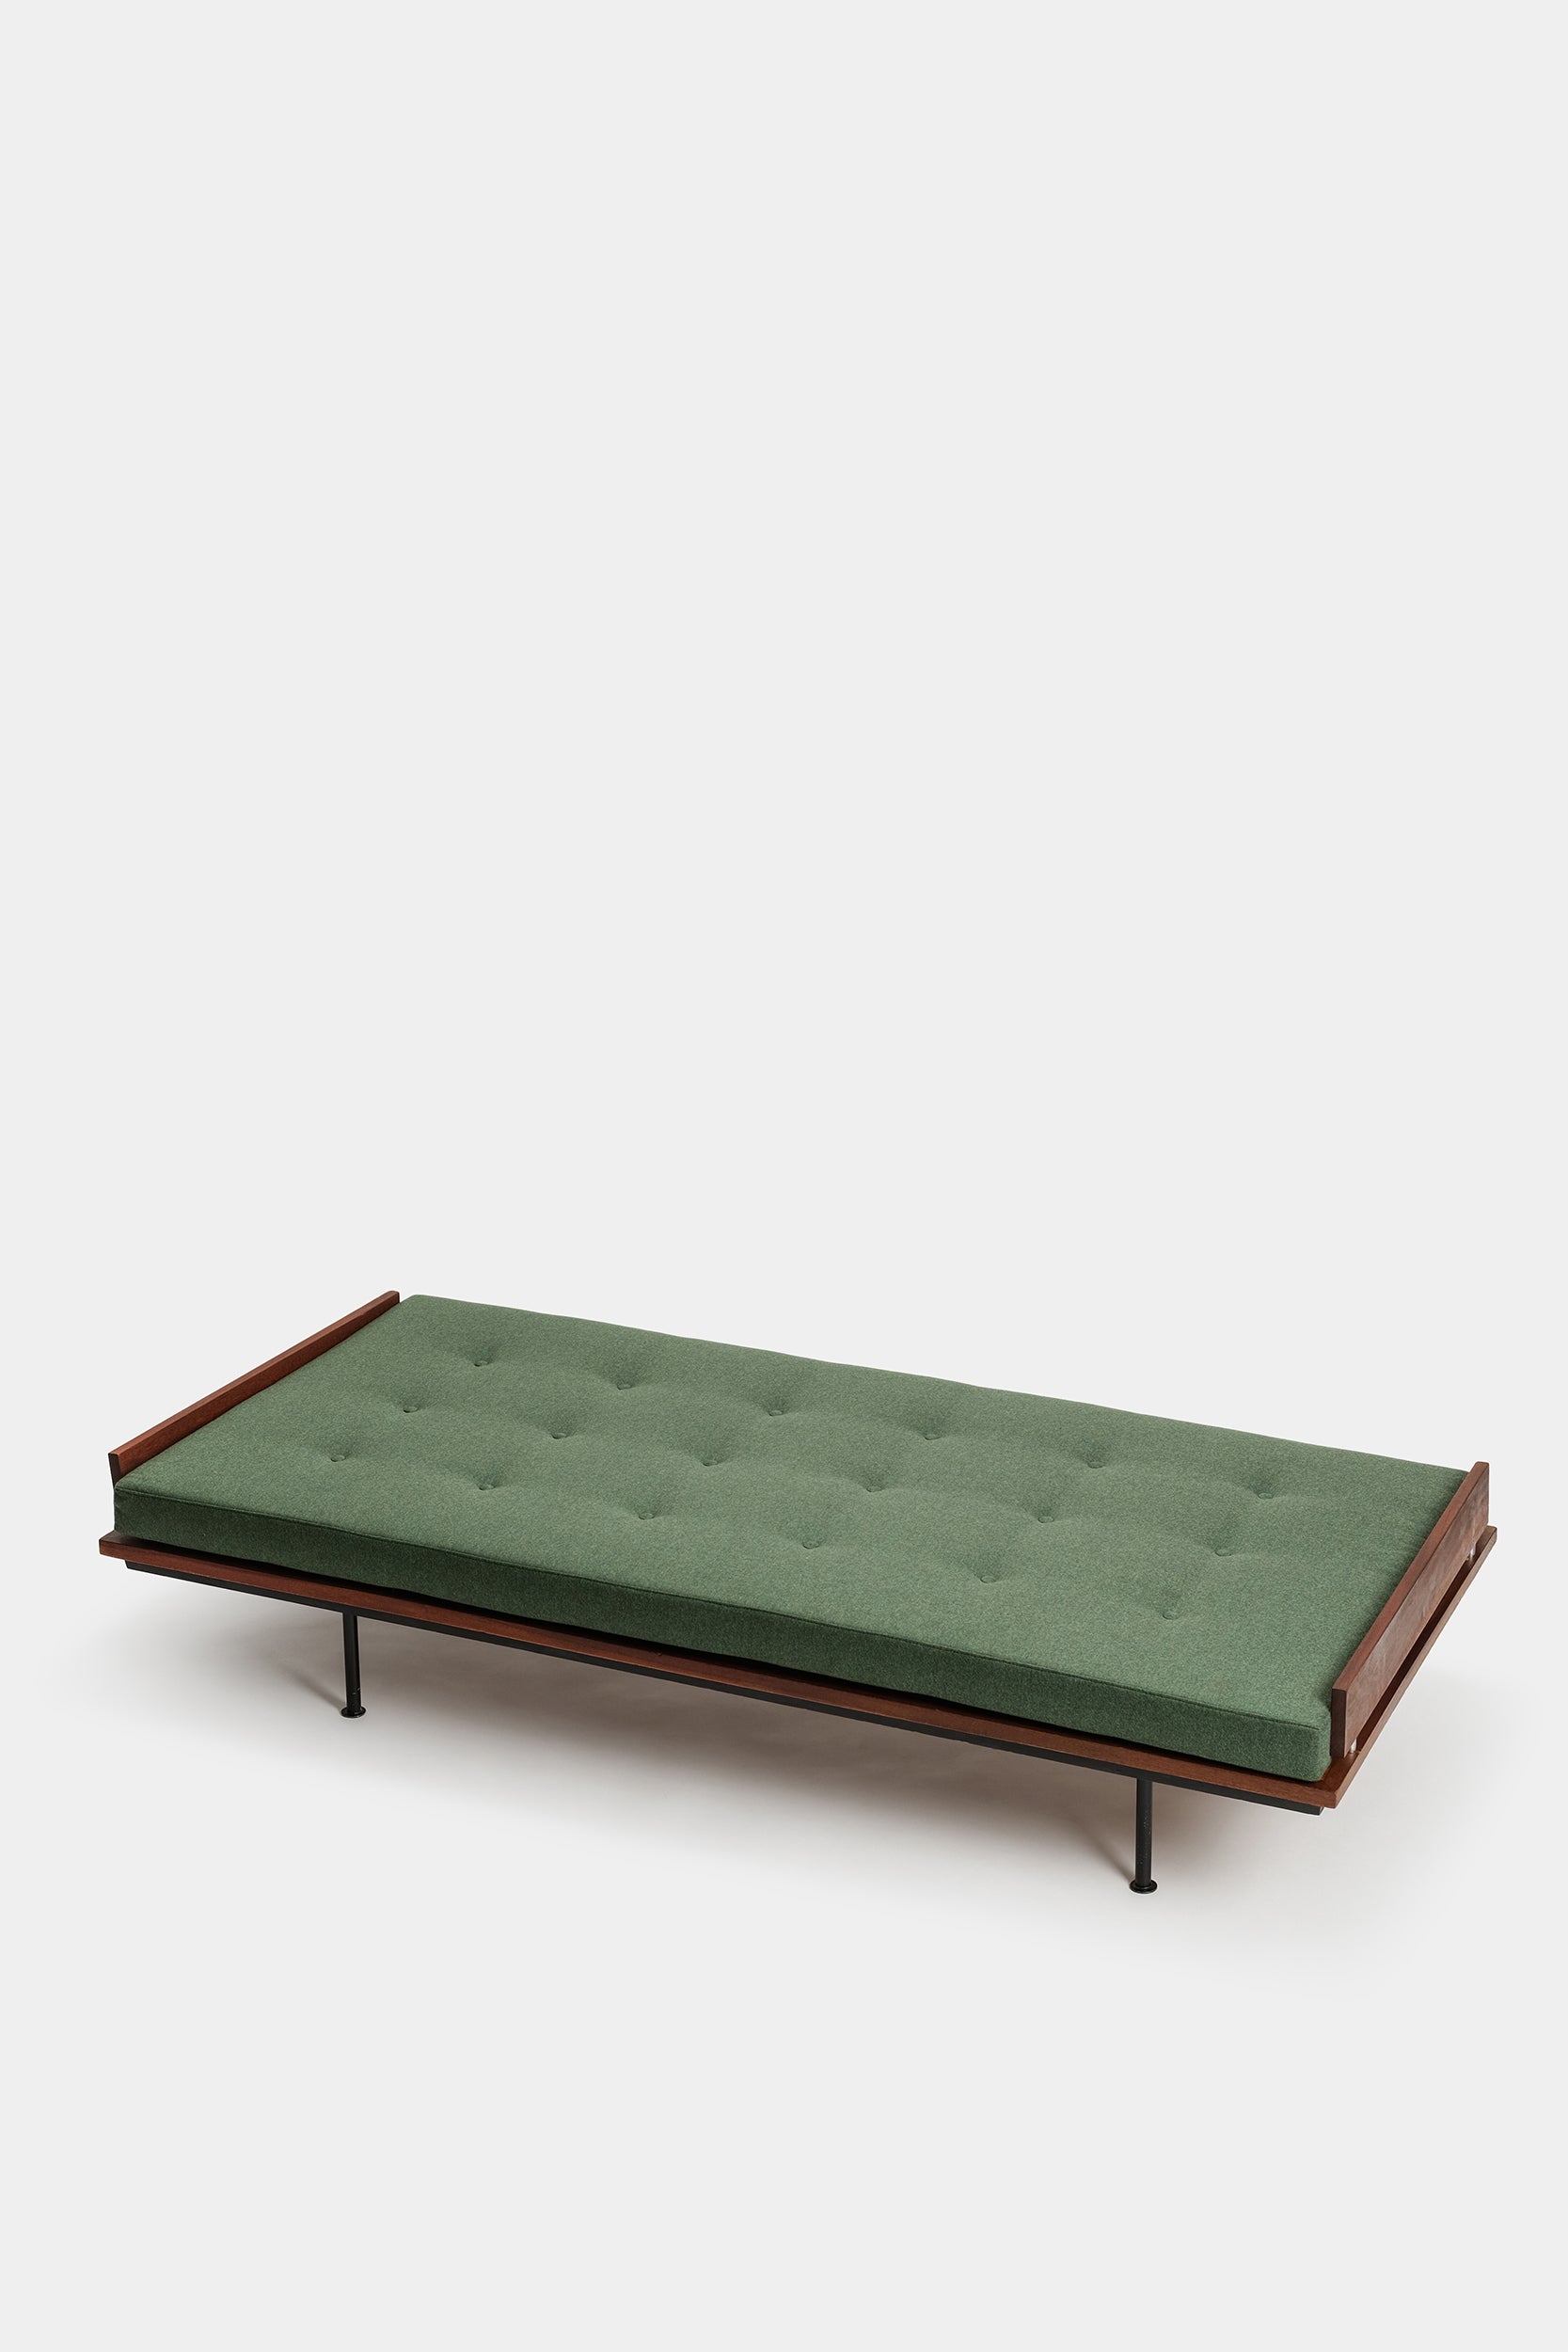 Kurt Thut Daybed with in green covered mattress 1960